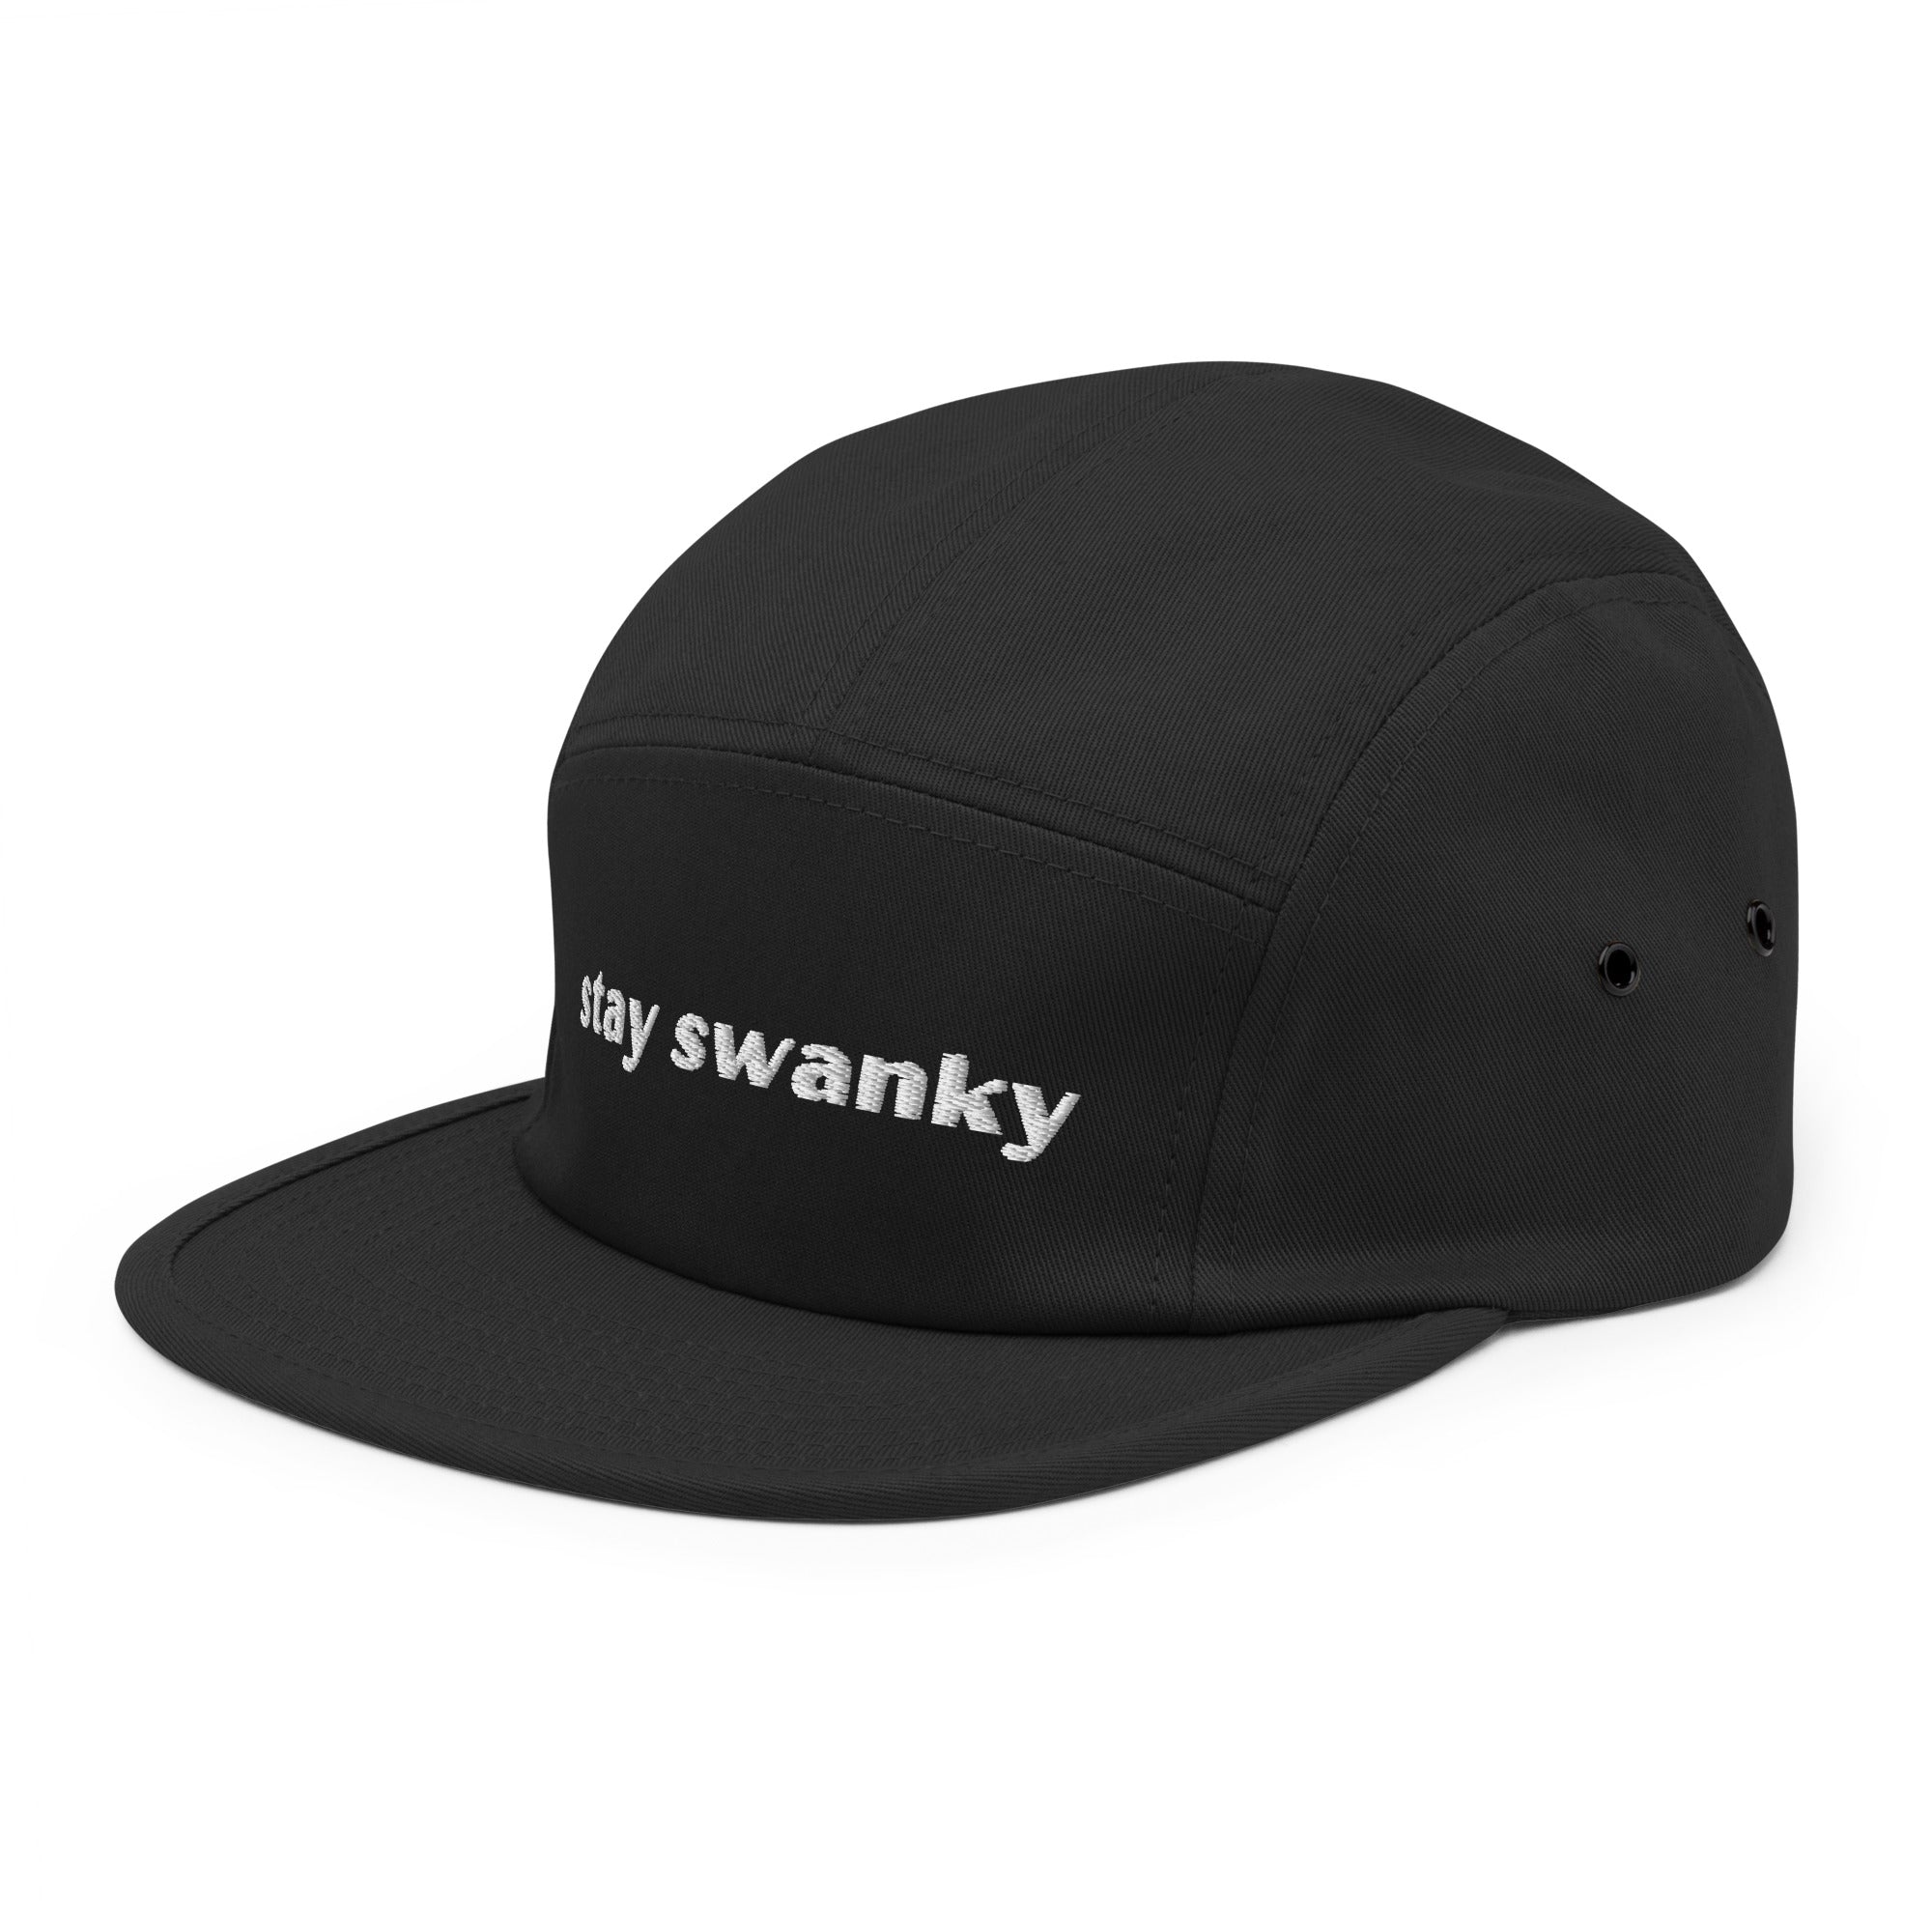 Stay Swanky Five Panel Camp Hat